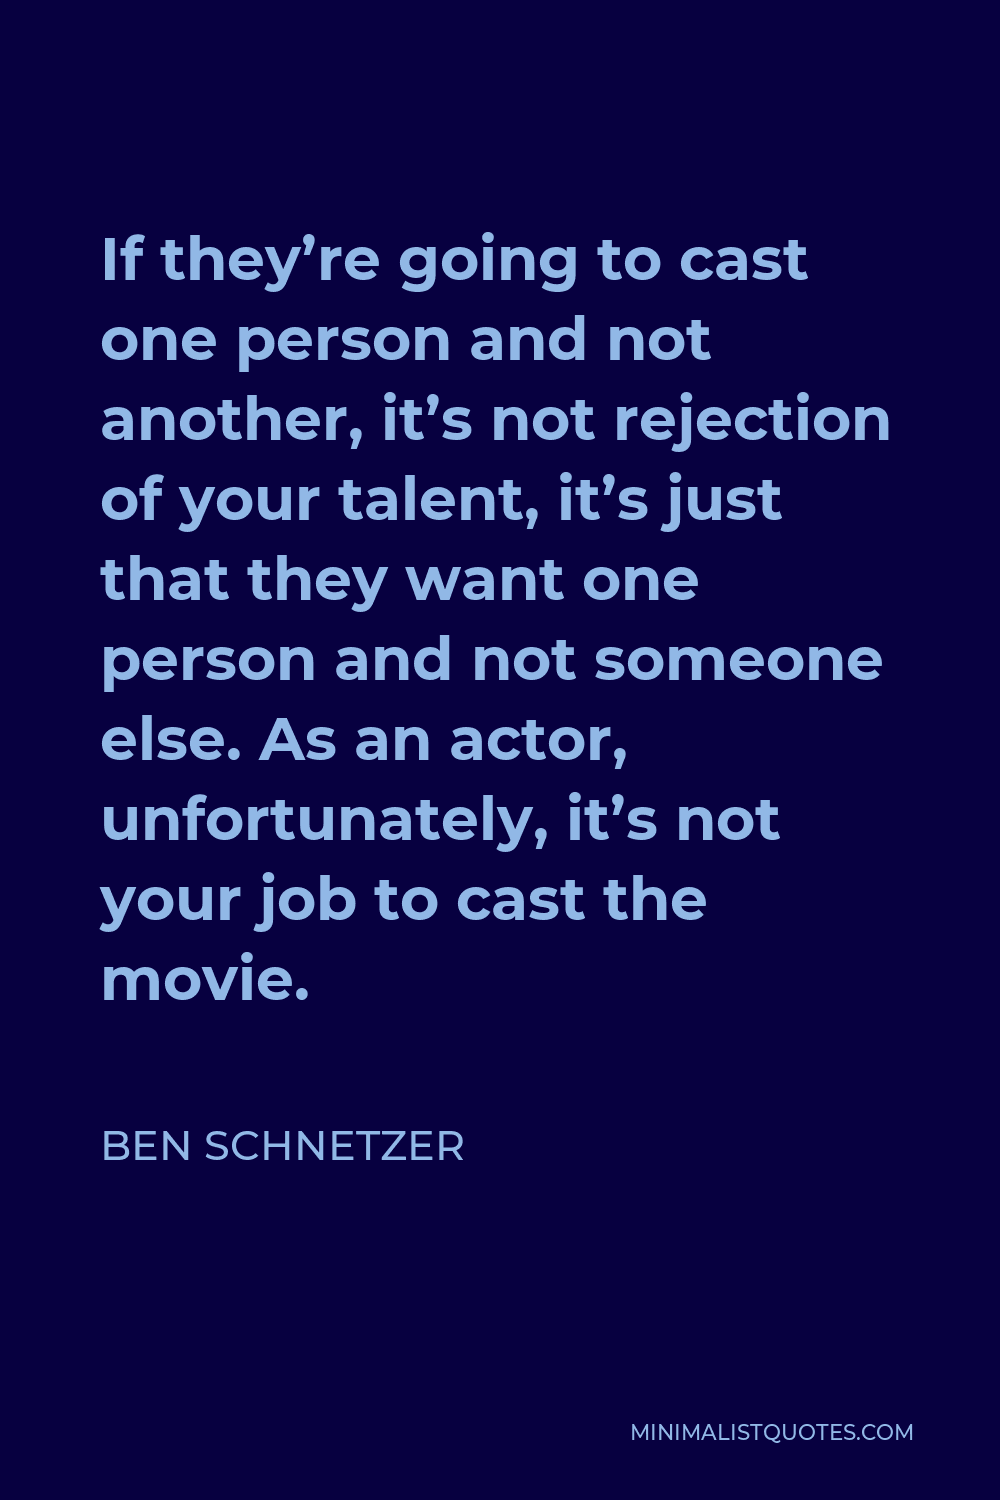 Ben Schnetzer Quote - If they’re going to cast one person and not another, it’s not rejection of your talent, it’s just that they want one person and not someone else. As an actor, unfortunately, it’s not your job to cast the movie.